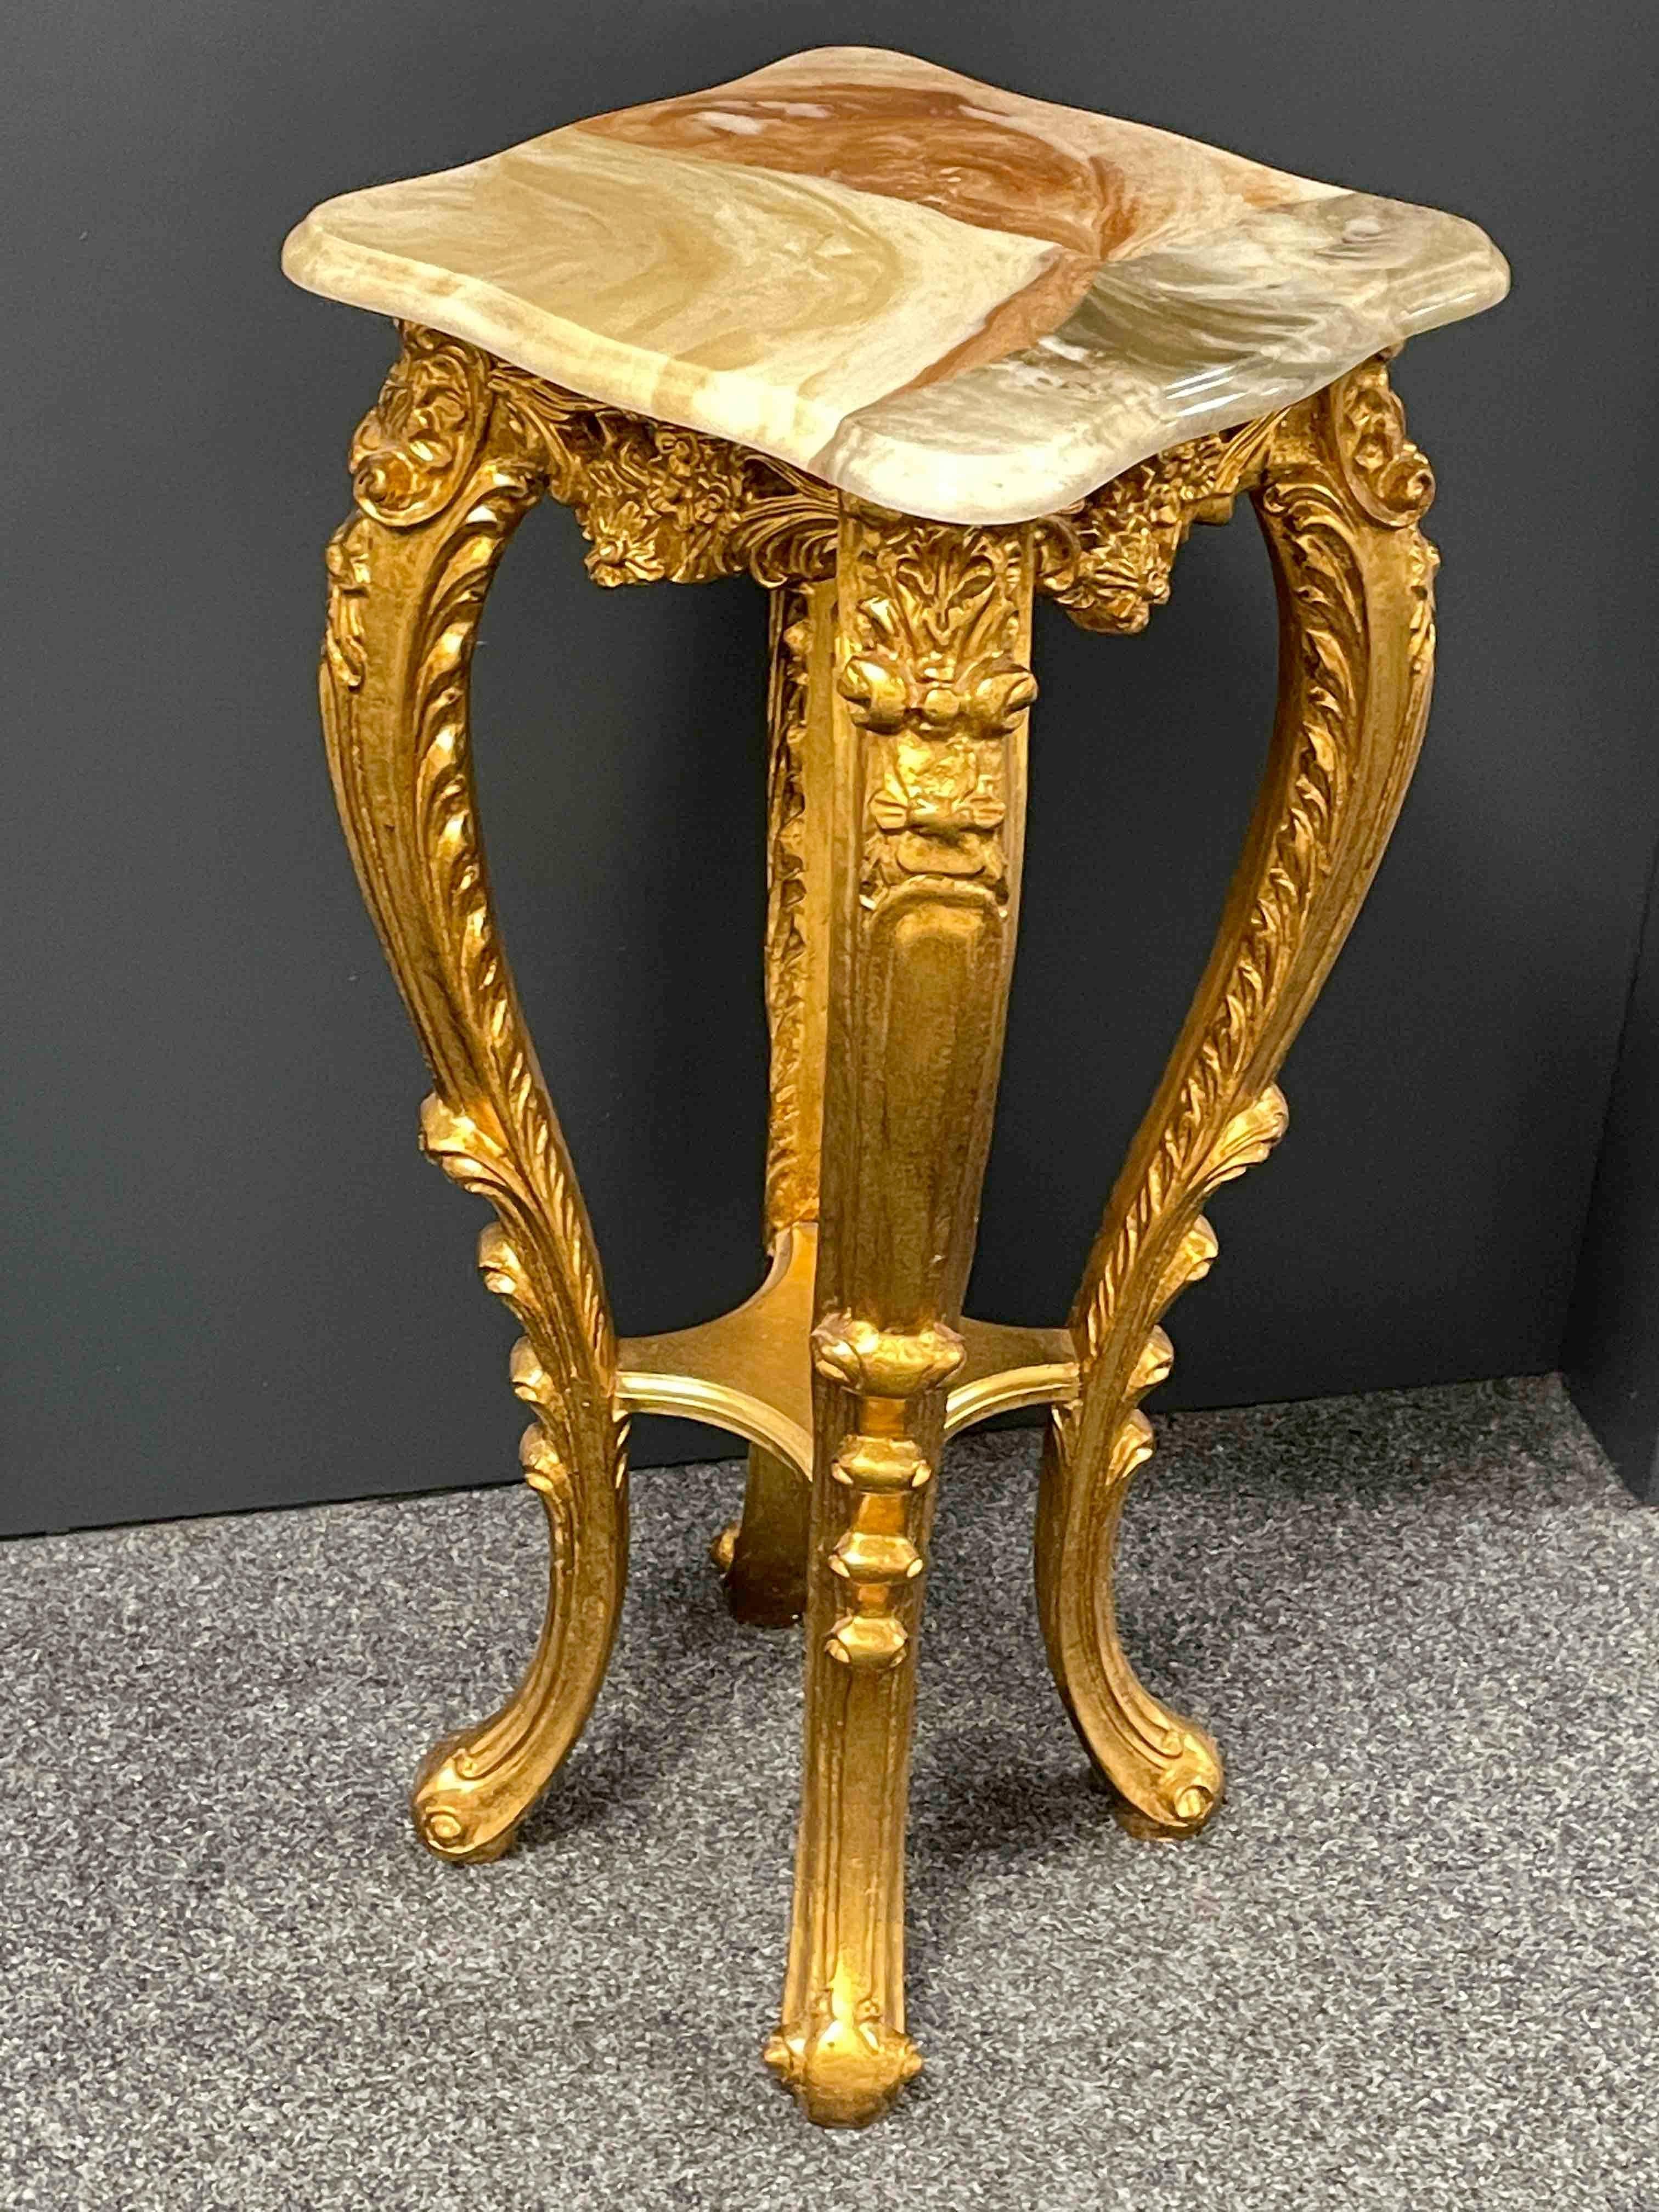 20th Century Carved Gilt Wood Toleware Console Pedestal Table, Italy For Sale 4